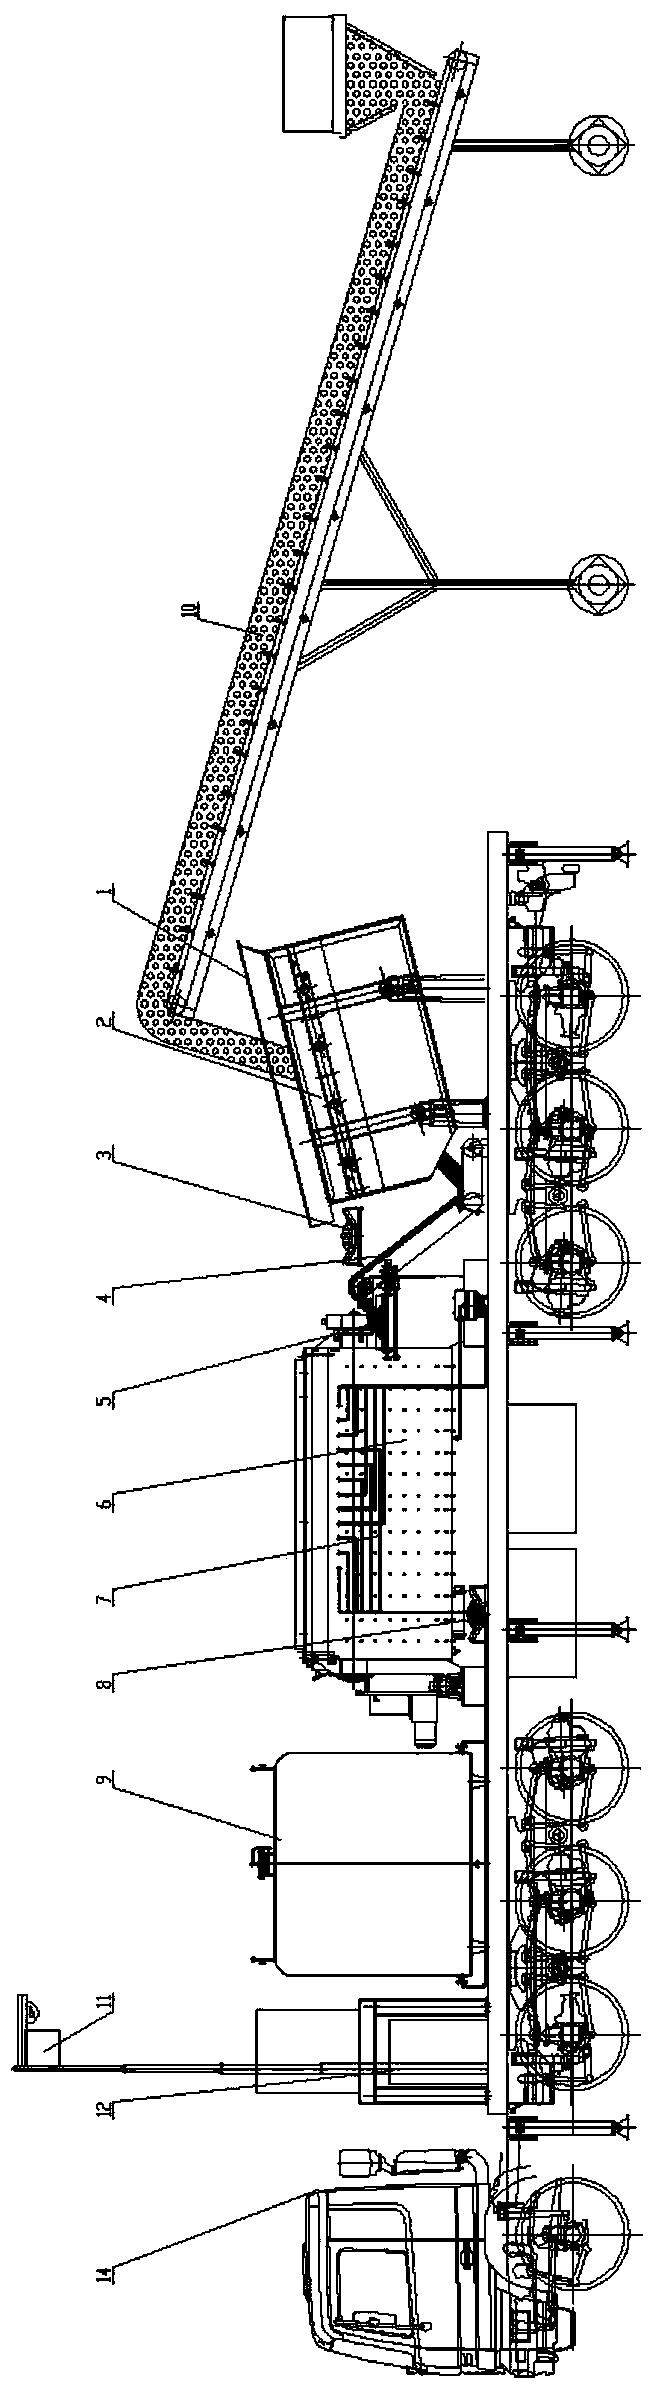 A vehicle-mounted integrated soil washing and repairing device